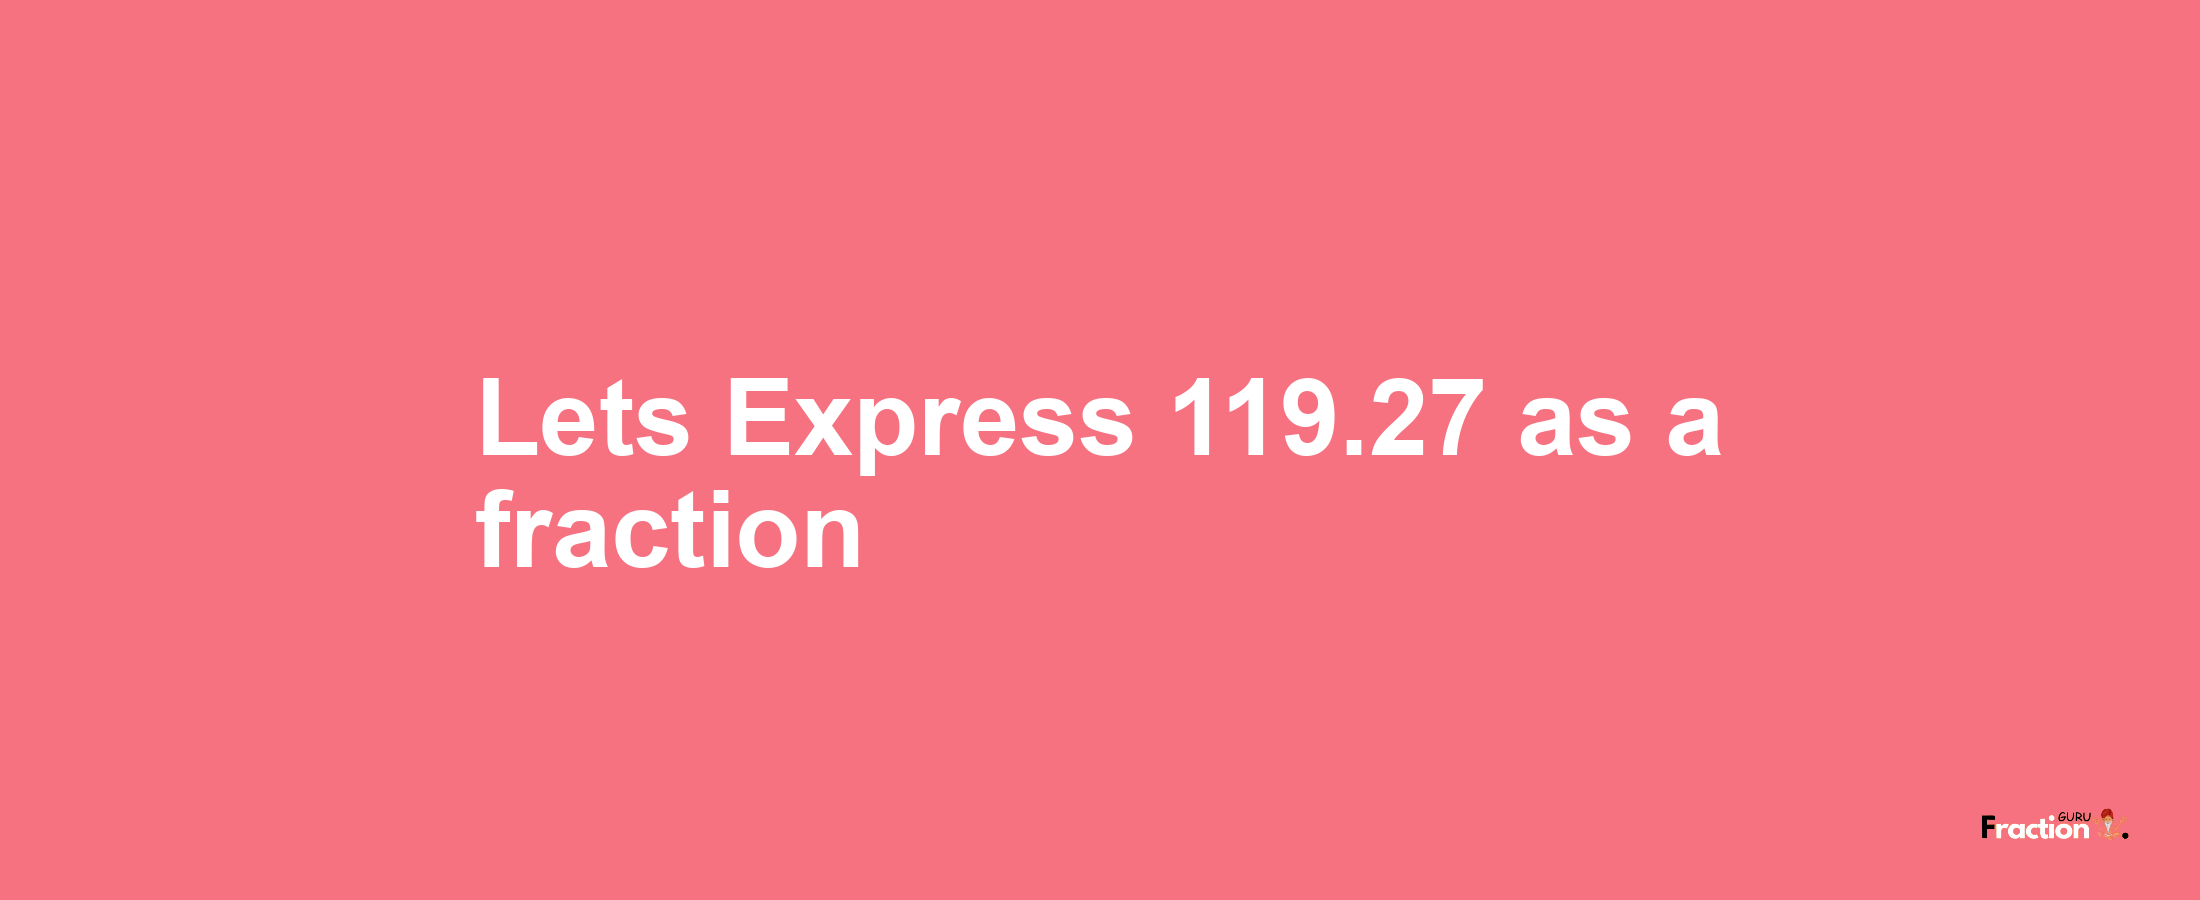 Lets Express 119.27 as afraction